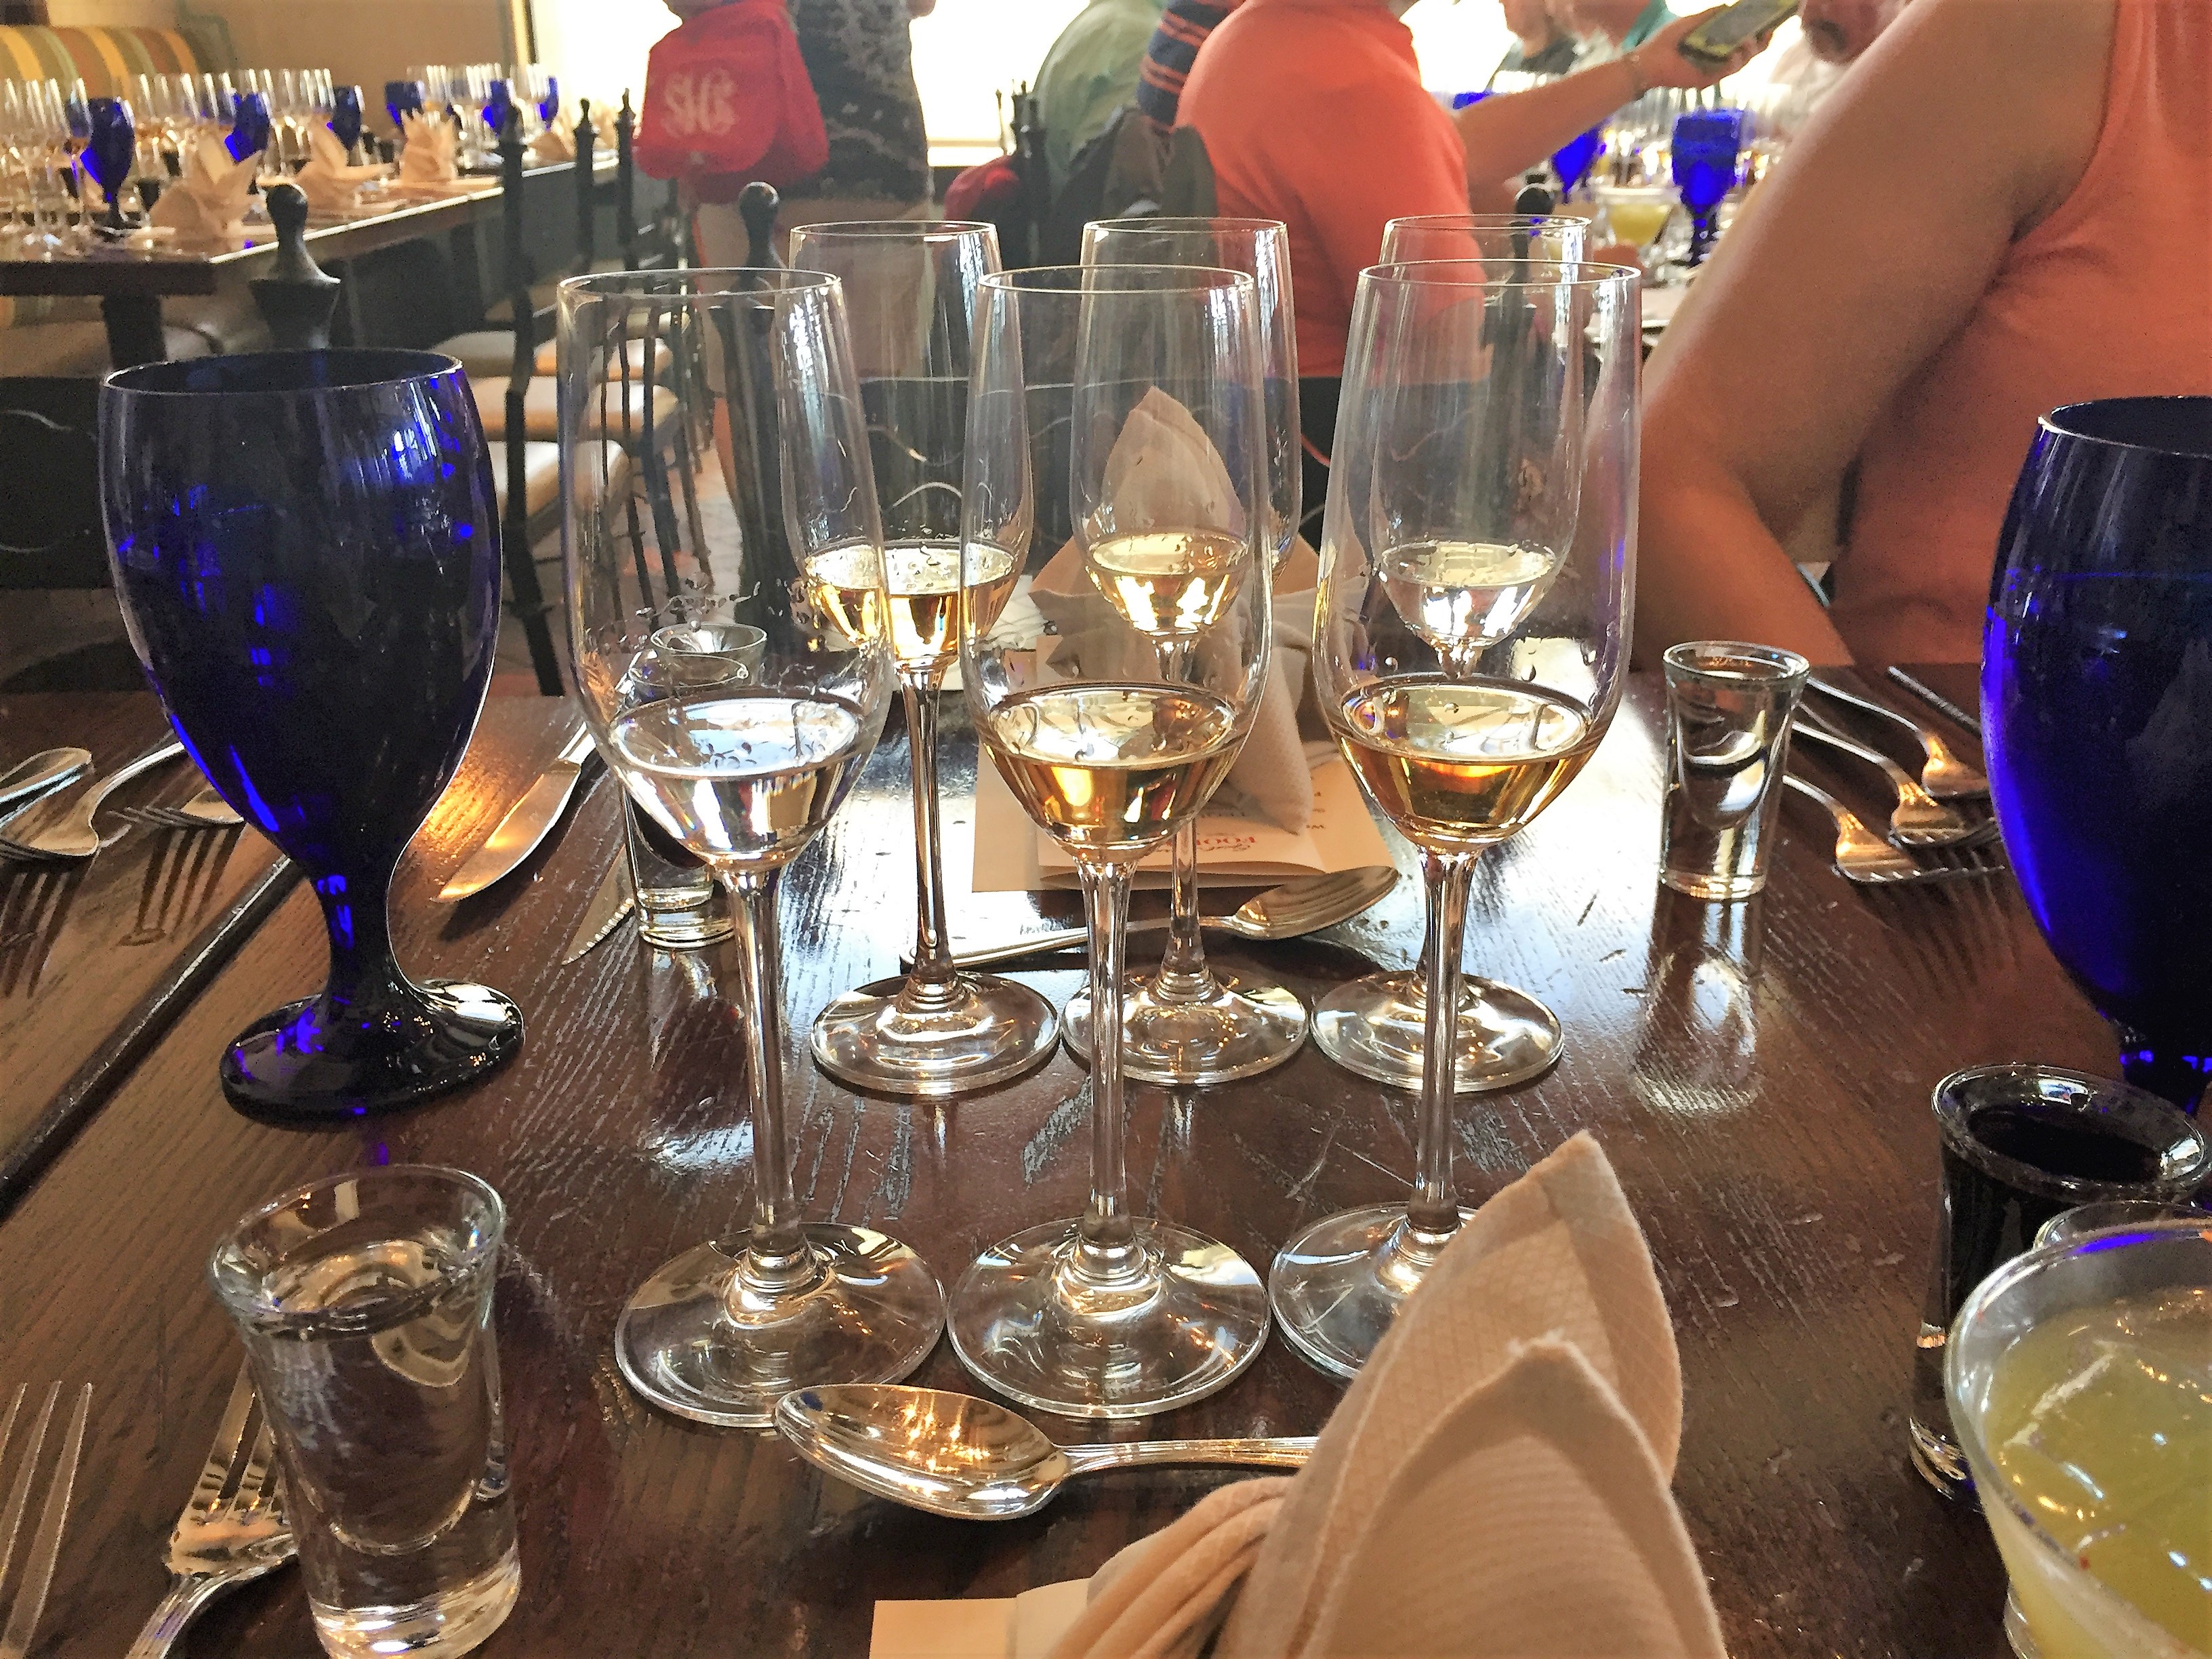 Disney World’s Food and Wine Festival: Mexican Tequila Lunch Review